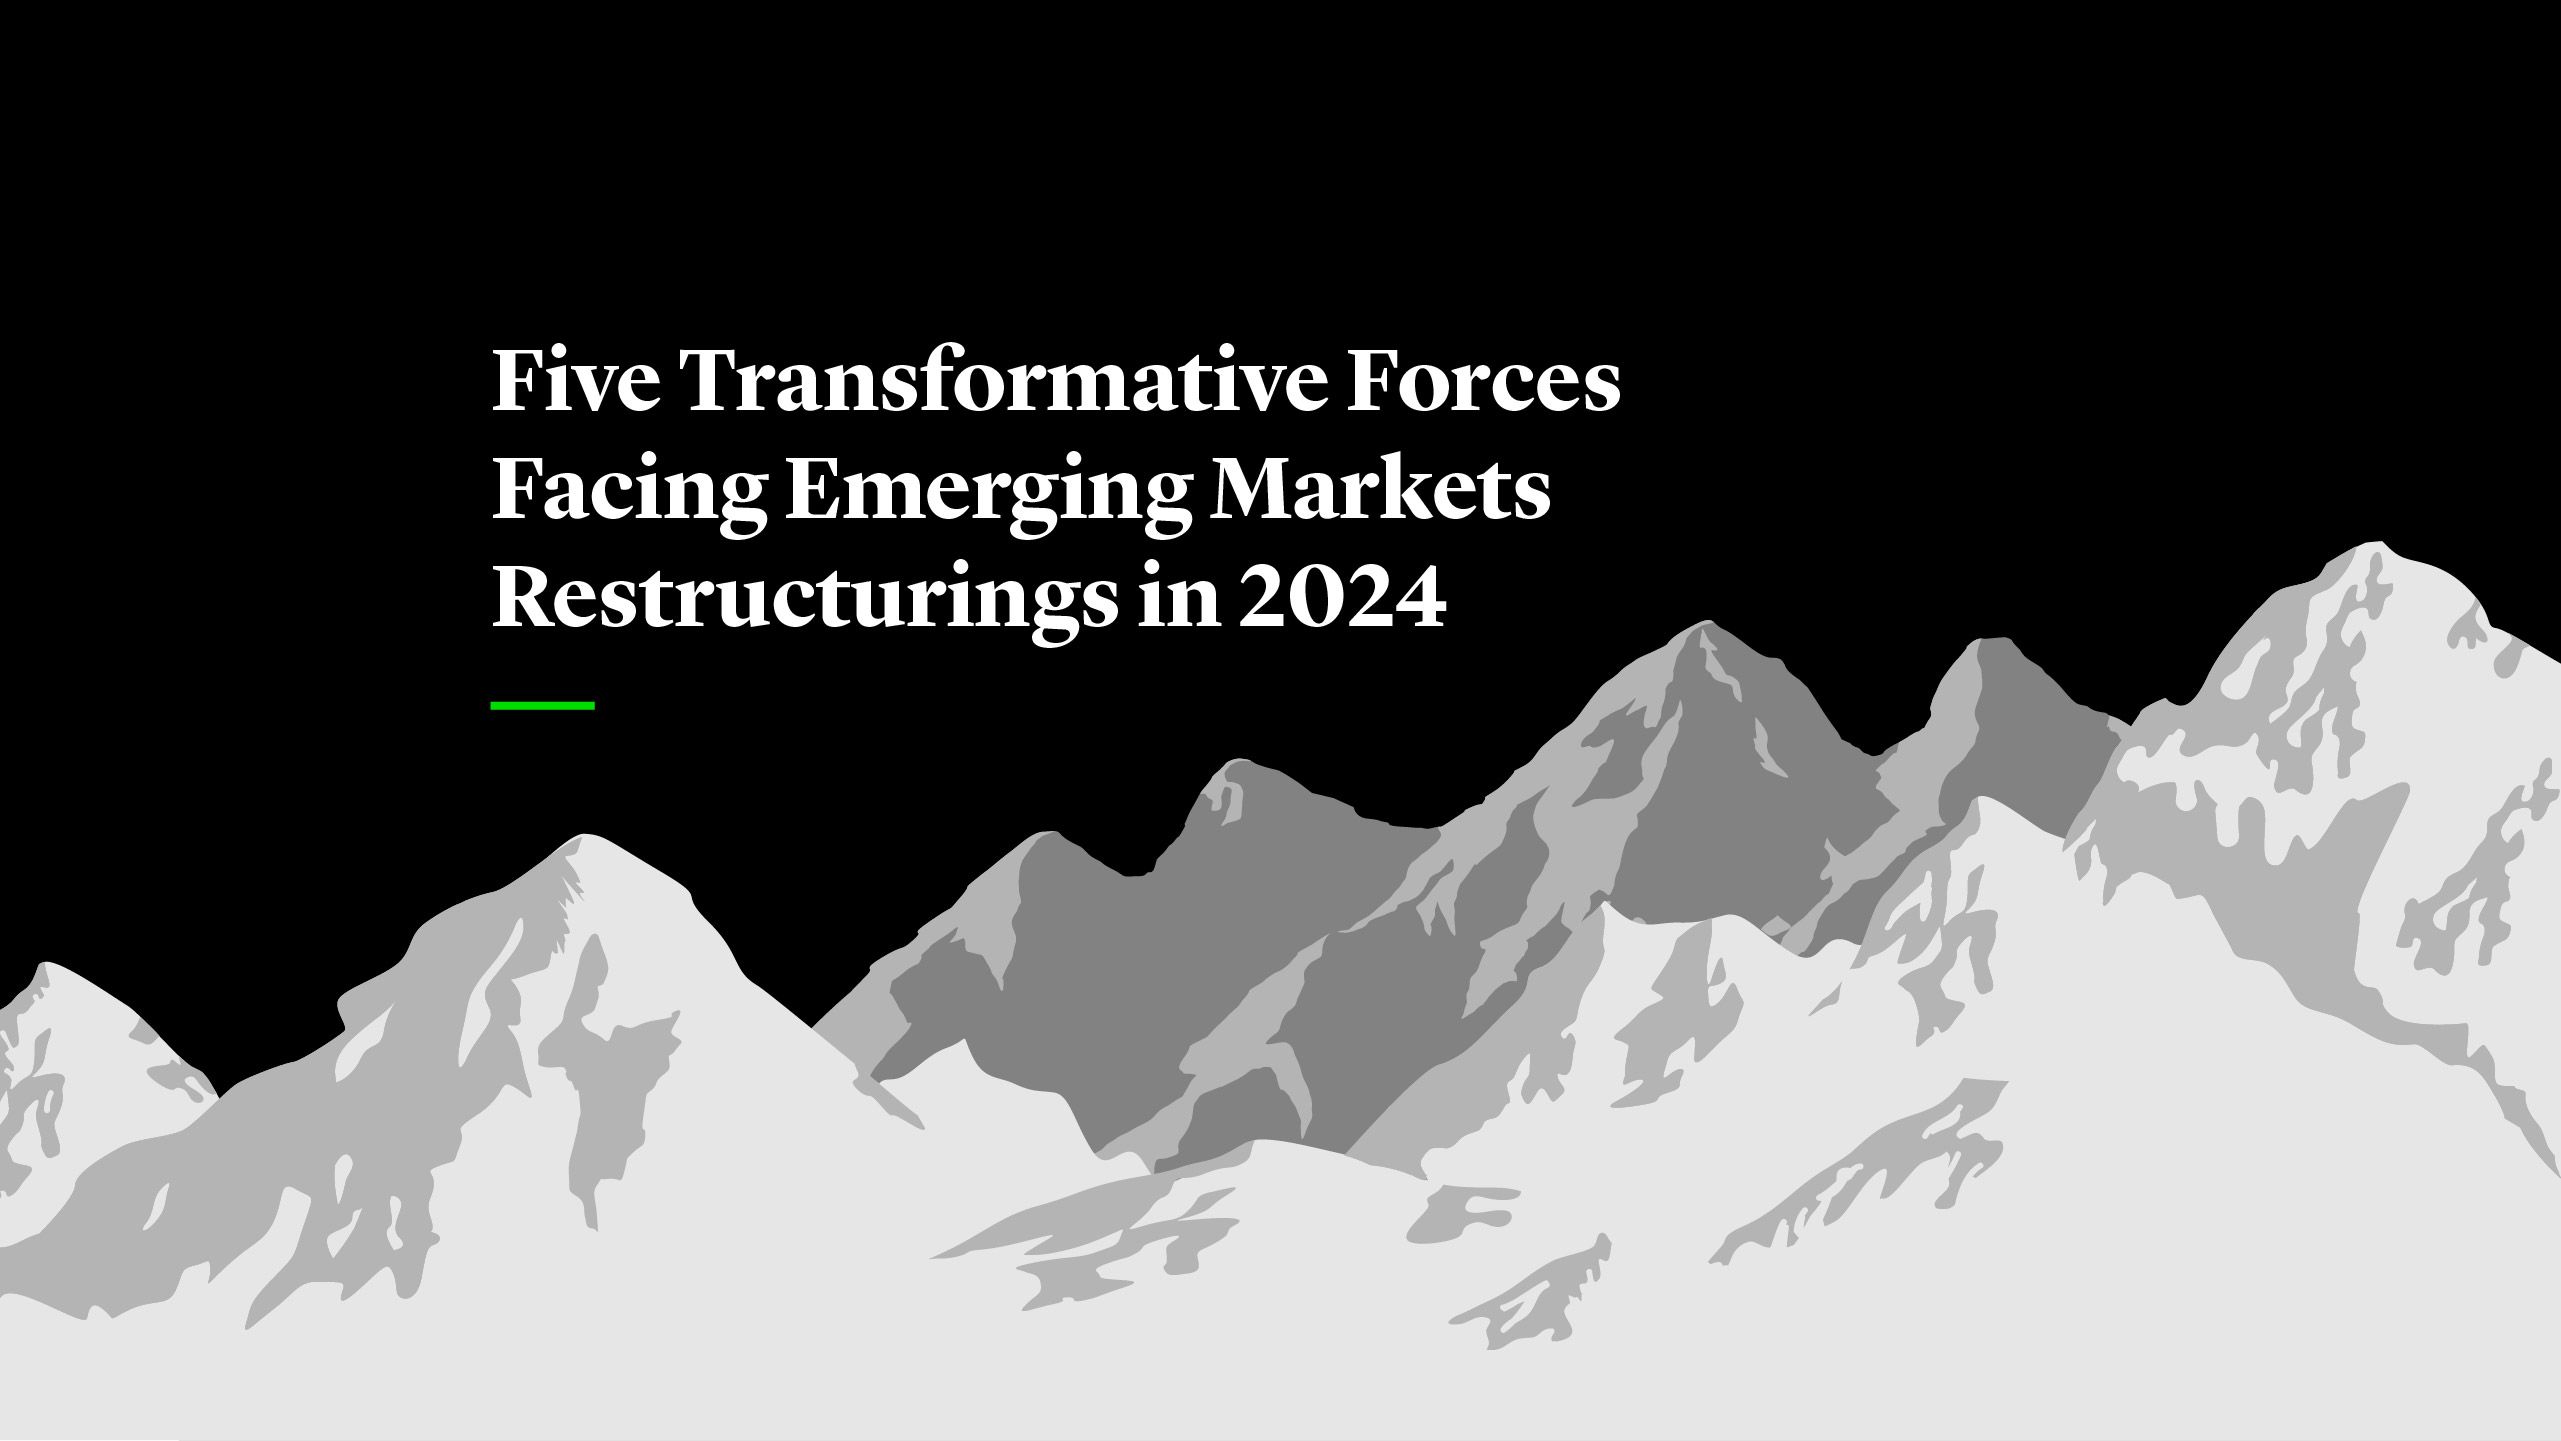 Five Transformative Forces Facing Emerging Markets Restructurings in 2024 